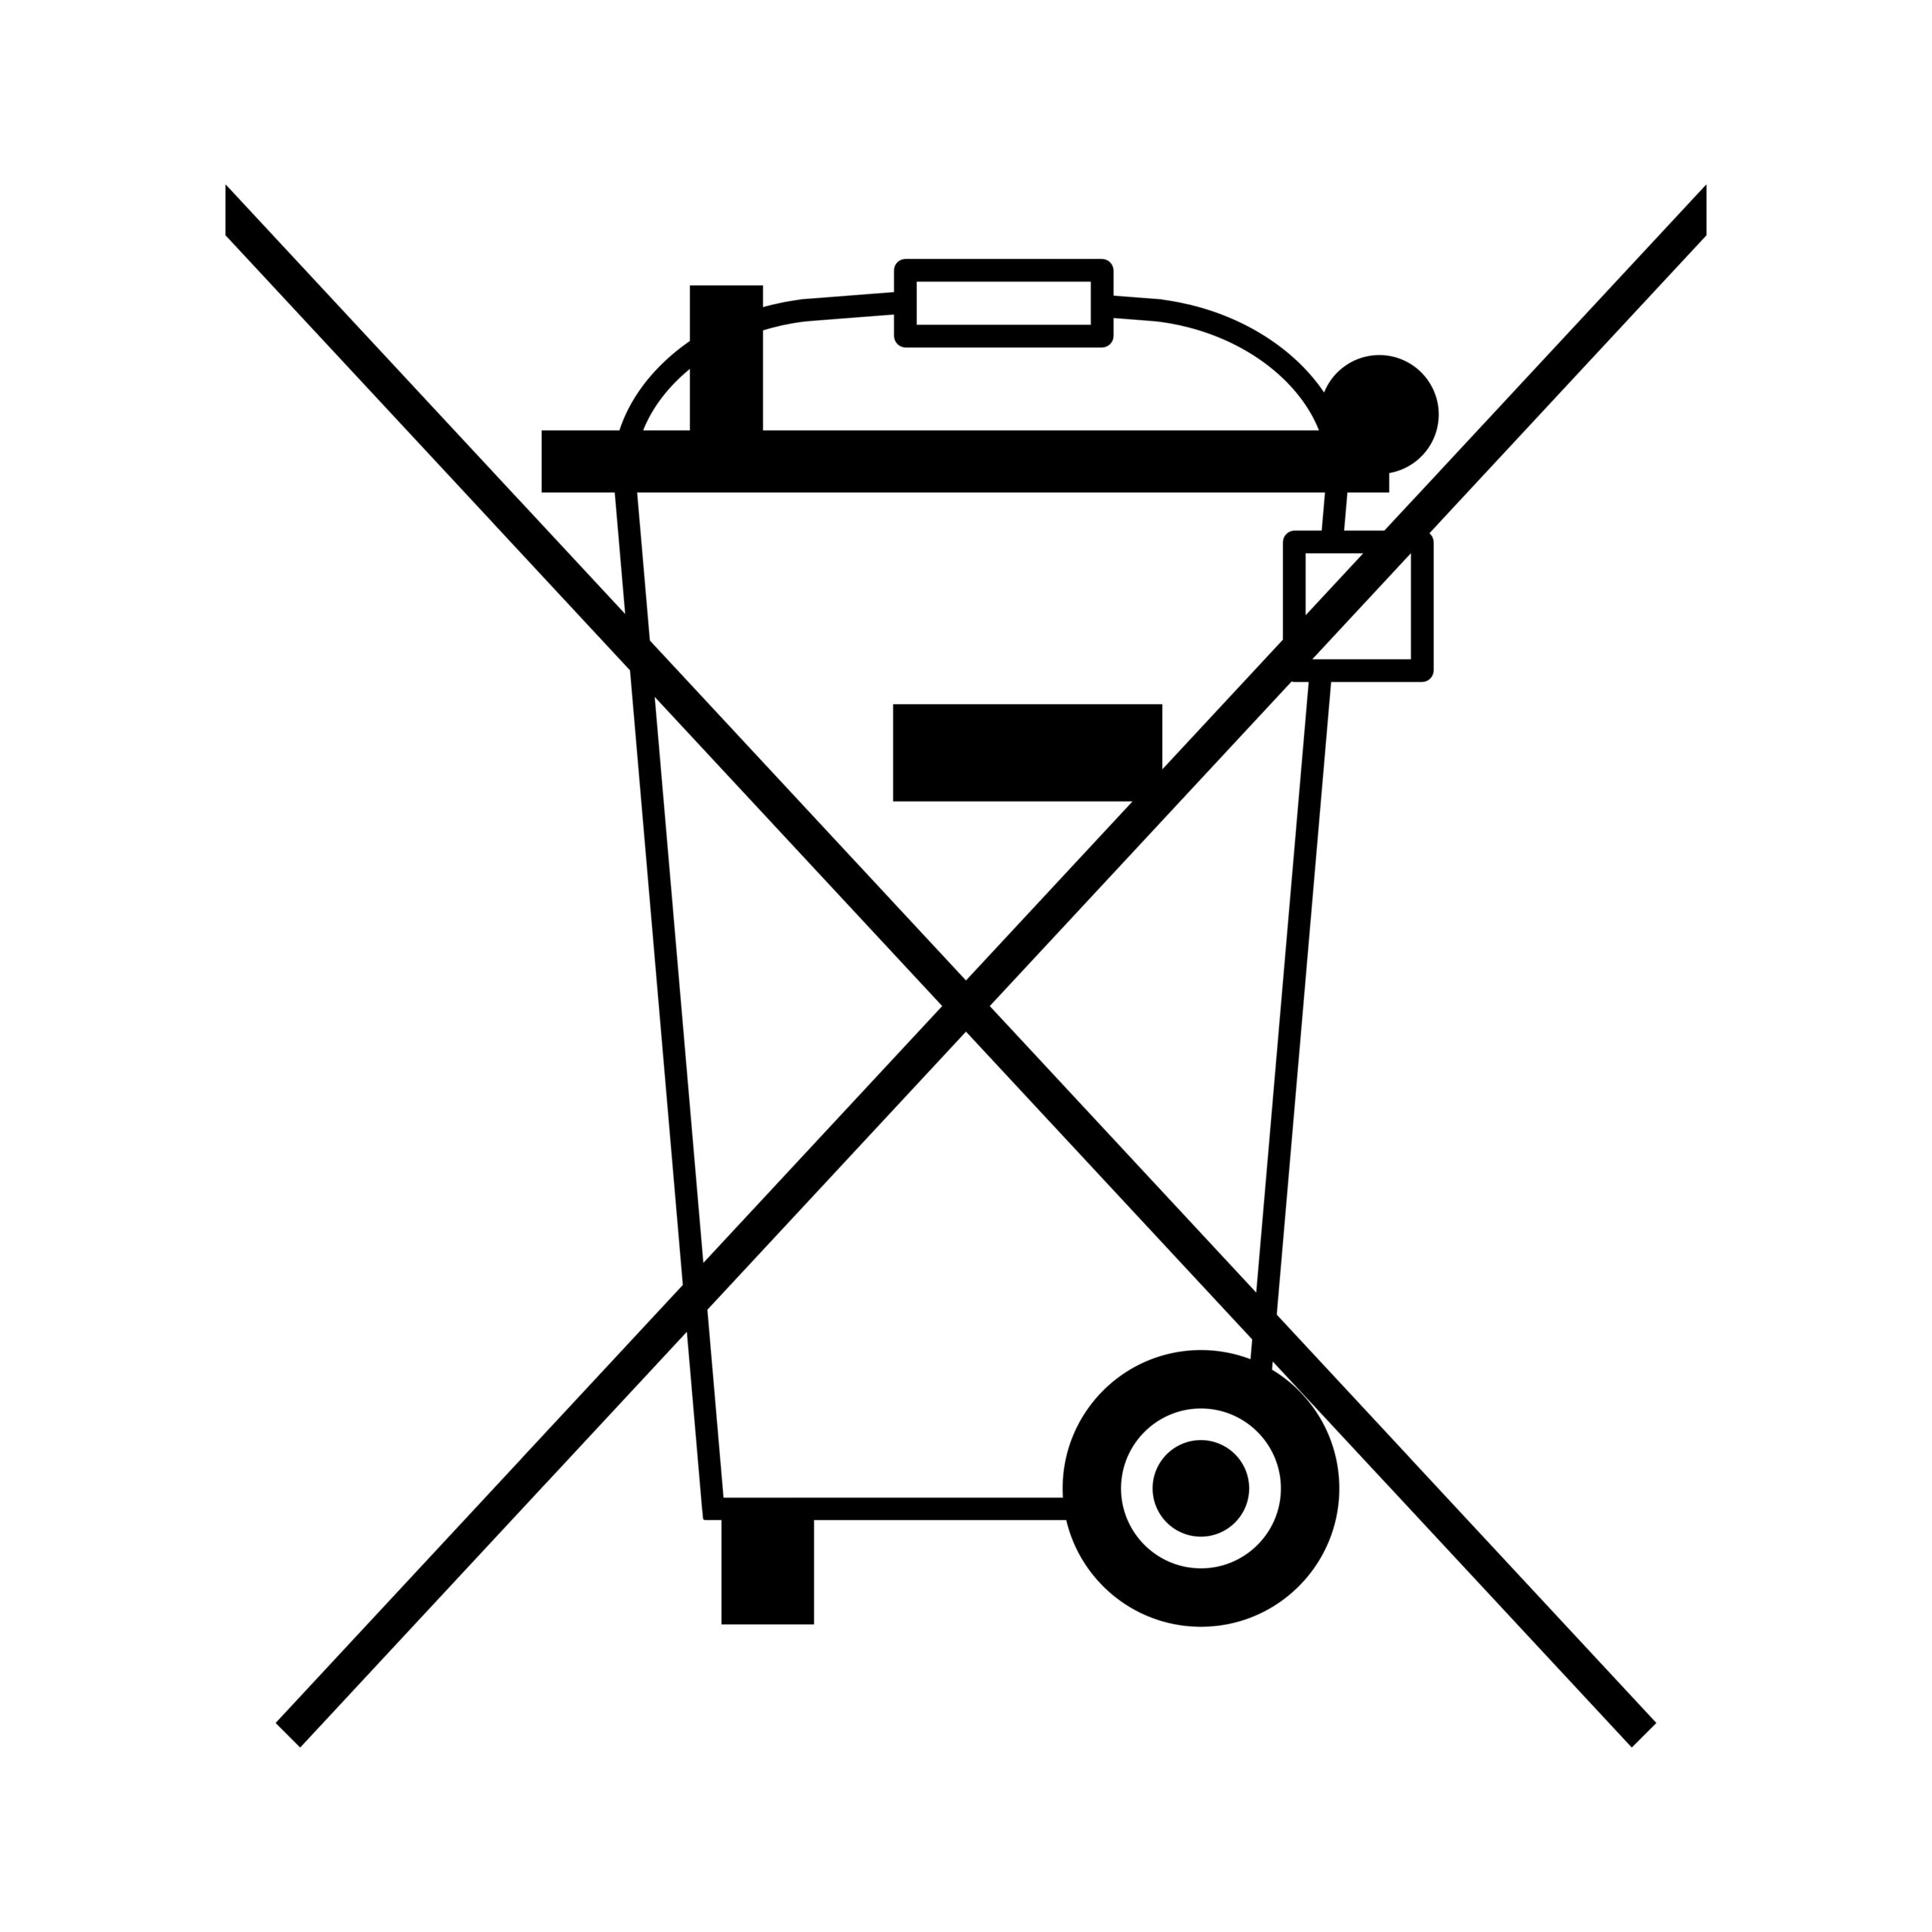 A black outlined icon of a dustbin with a cross through it